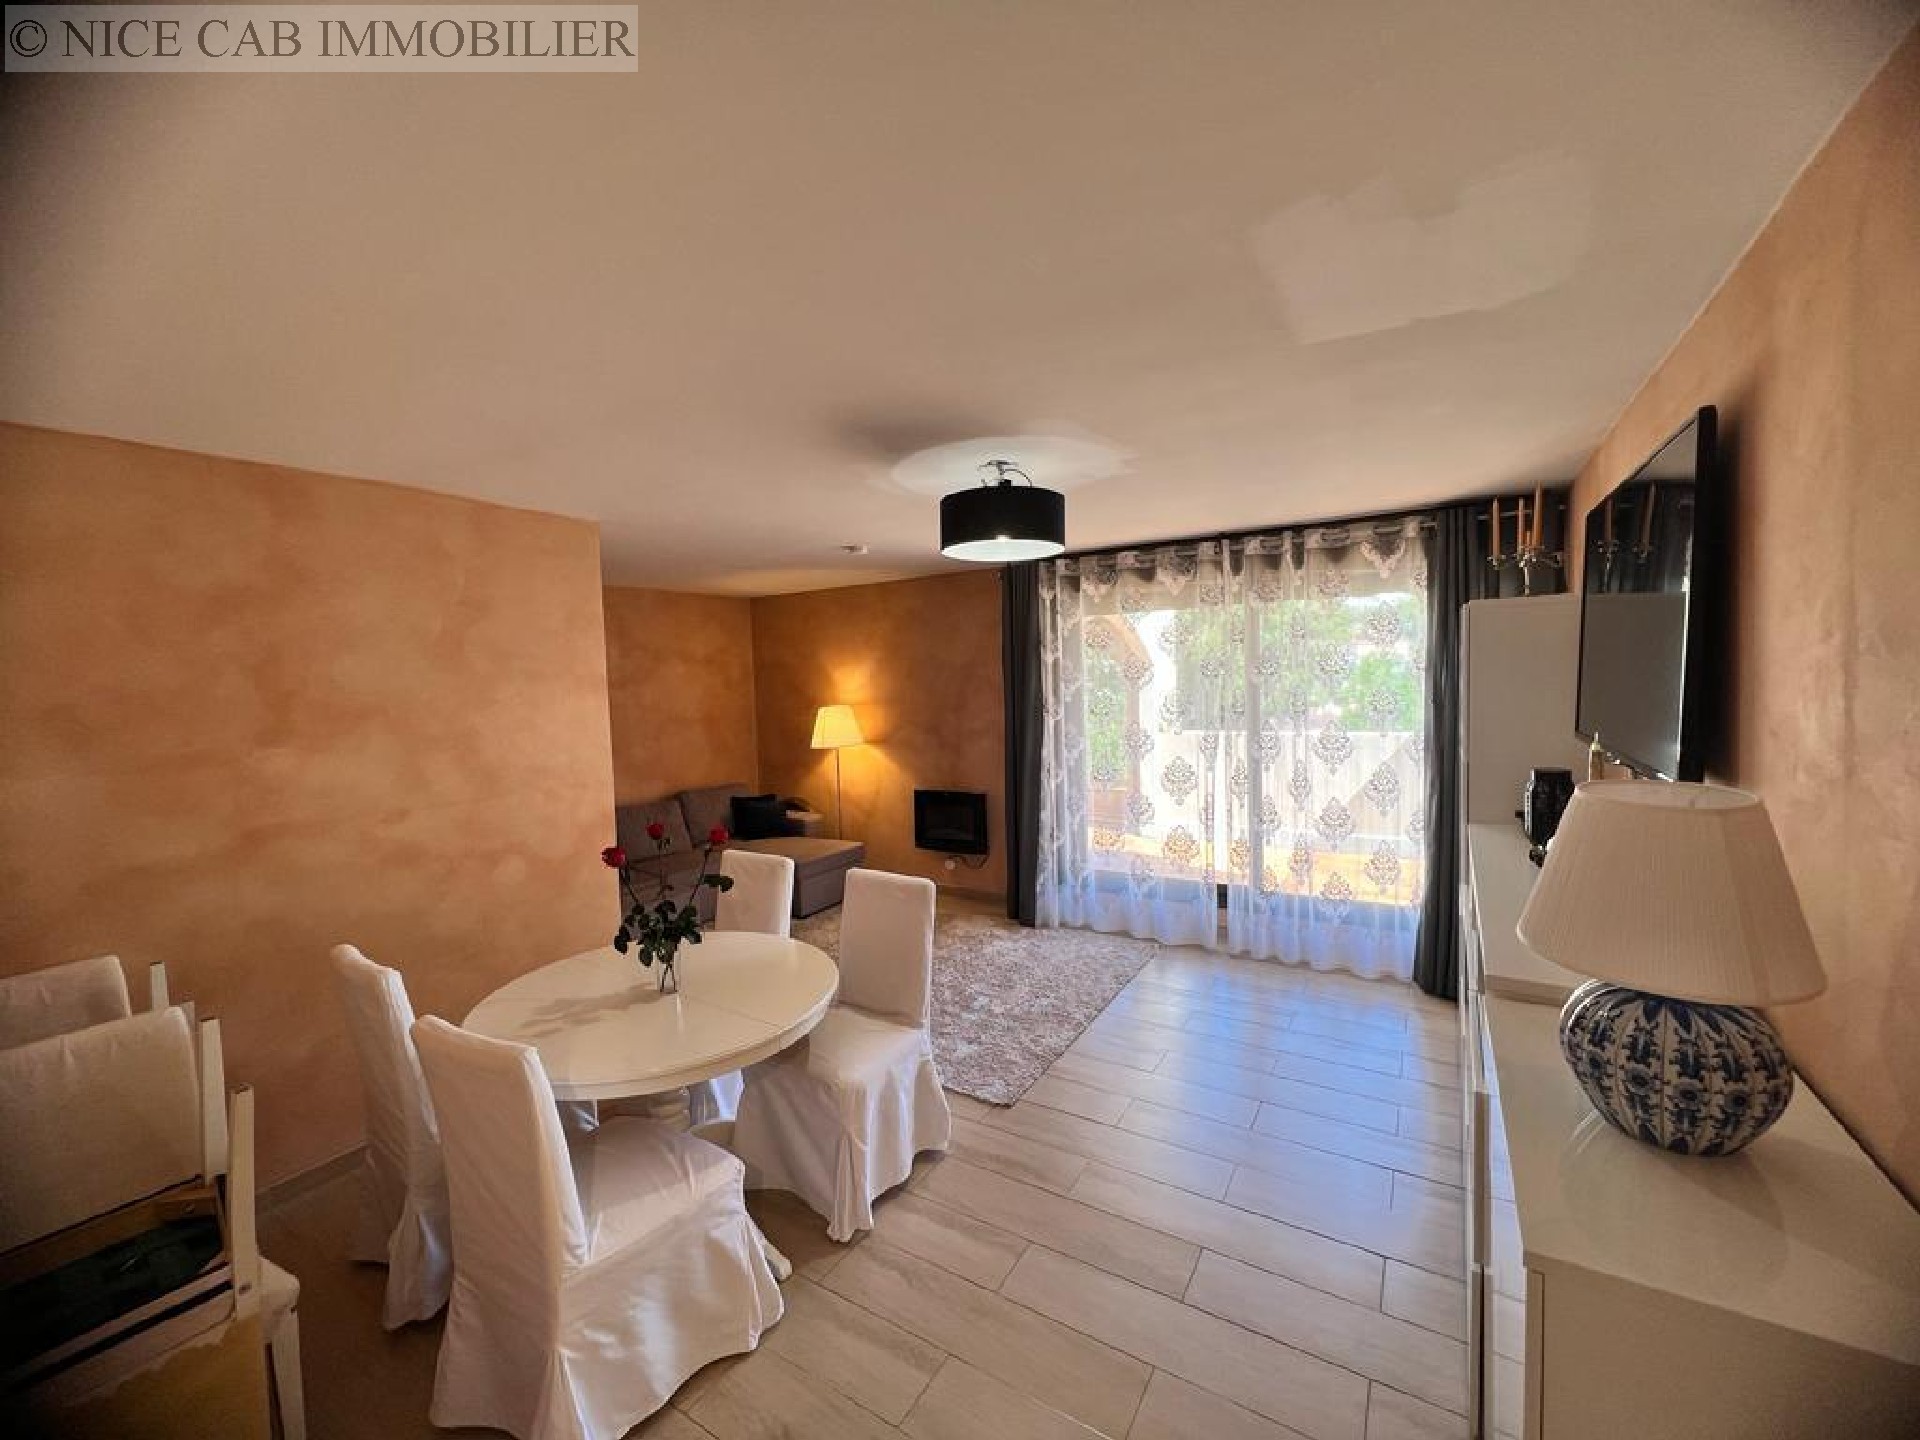 Apartment A property to buy, , 104 m², 4 rooms